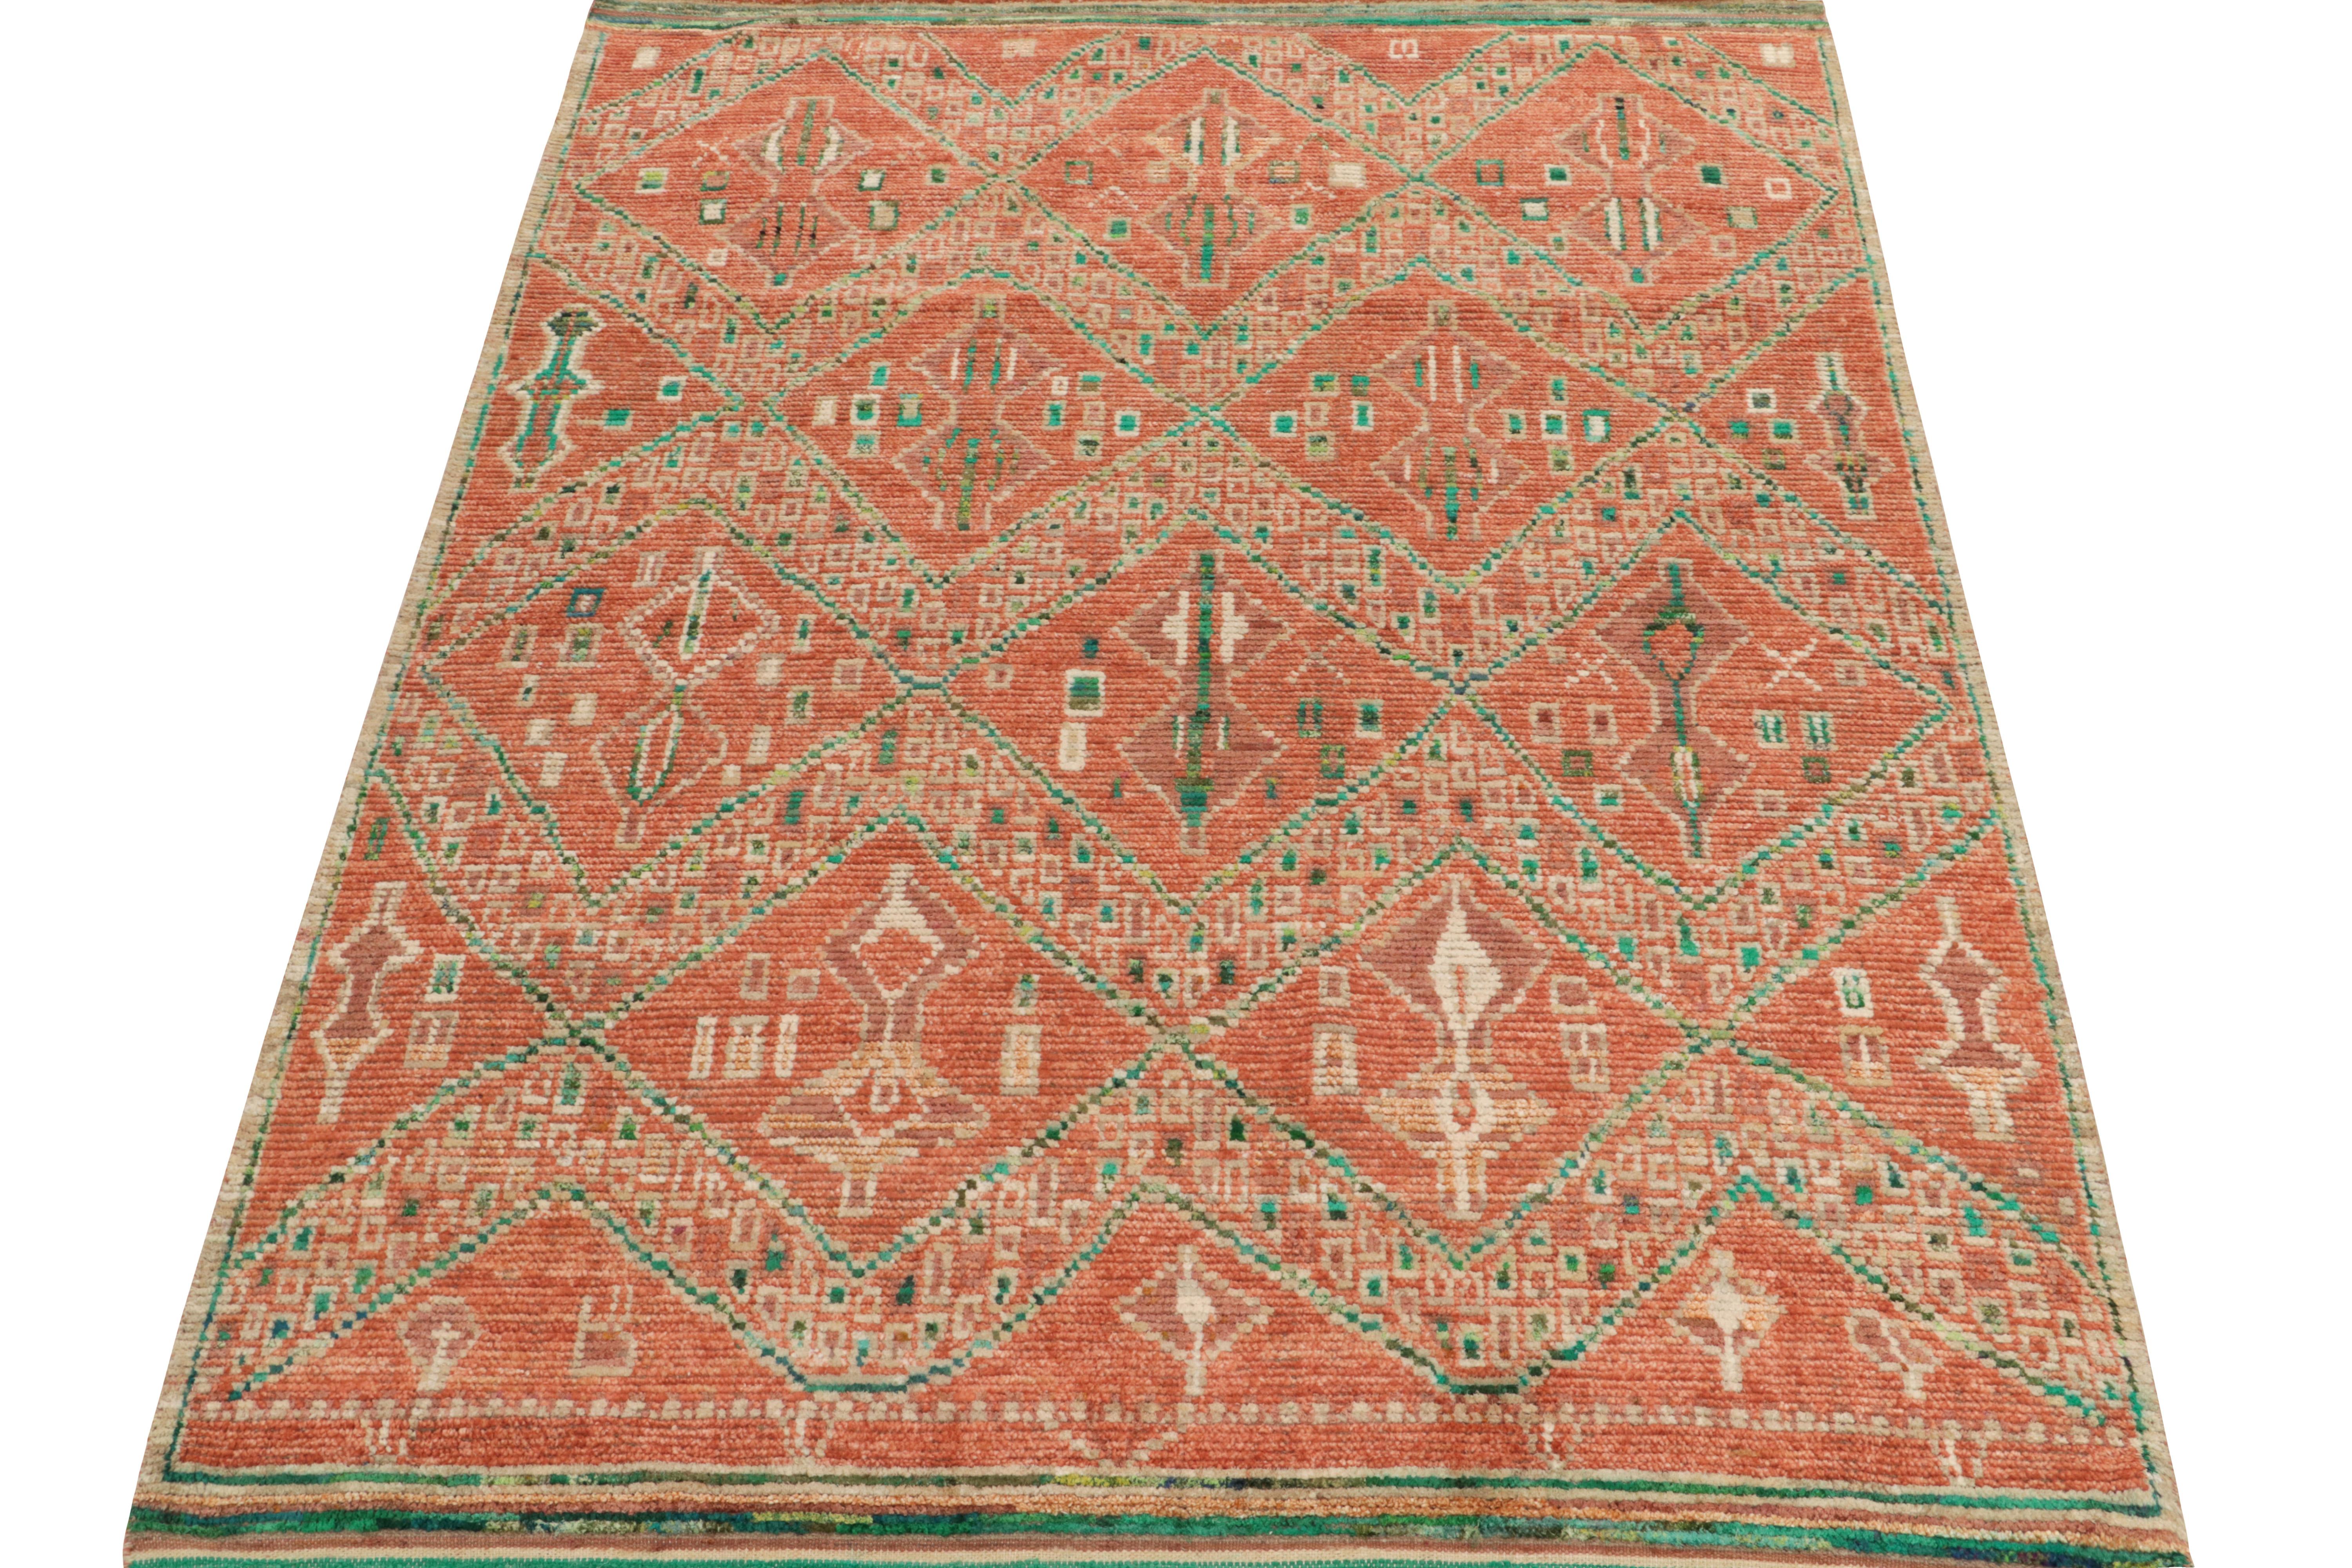 Hand-knotted in fine silk, a 6x9 Moroccan style piece from Rug & Kilim. The imaginative area rug enjoys scintillating pagination with chevrons culminating into diamond patterns idyllic to this style in rich tangerine & forest green tones. Marking